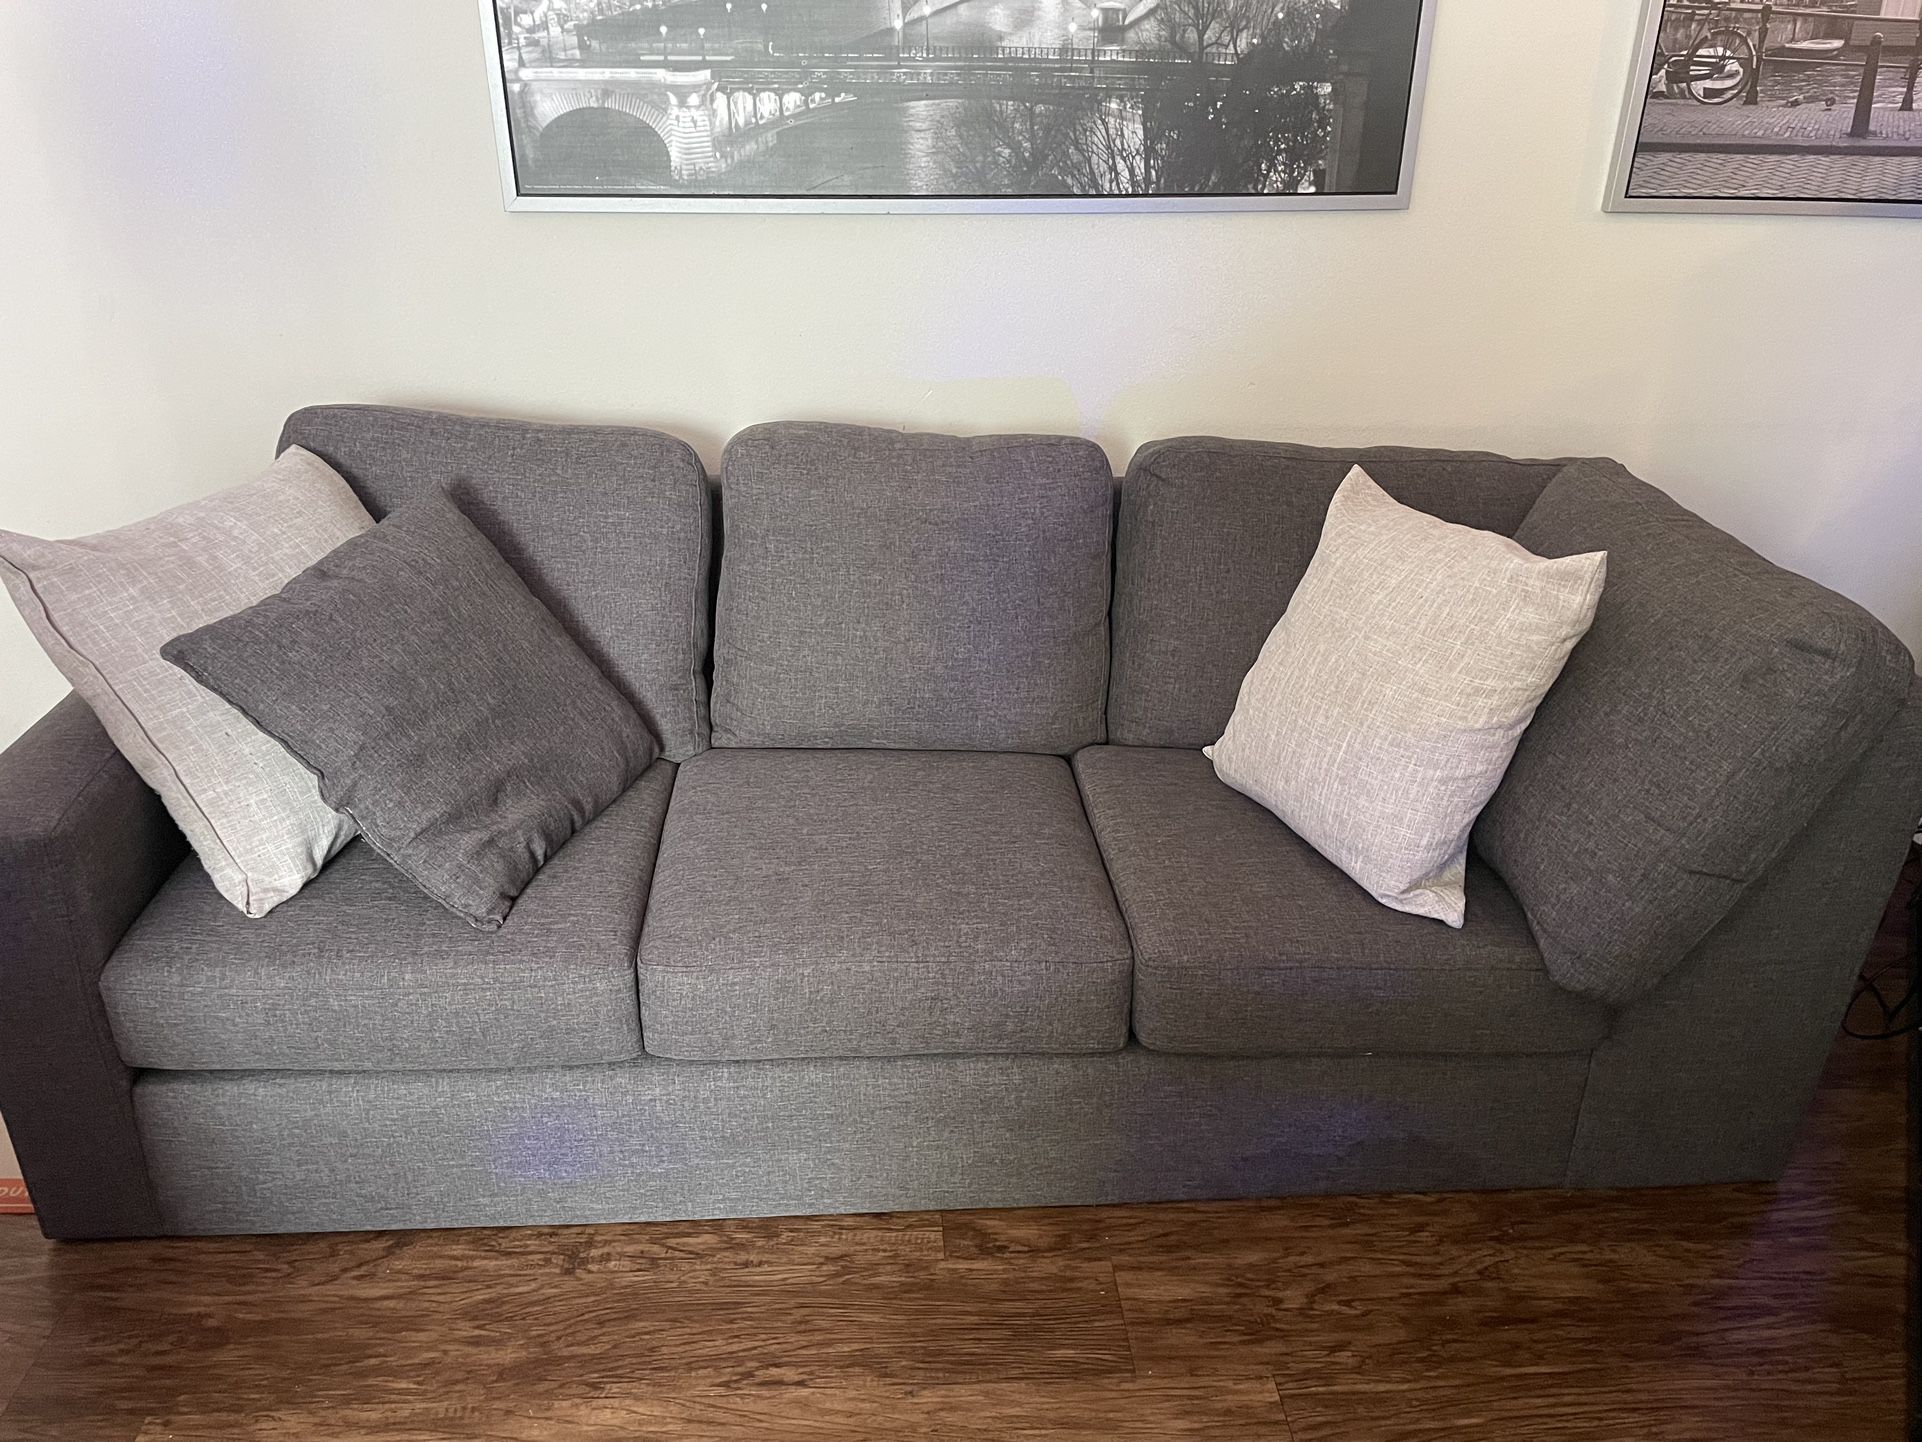 Super Nice Couch 